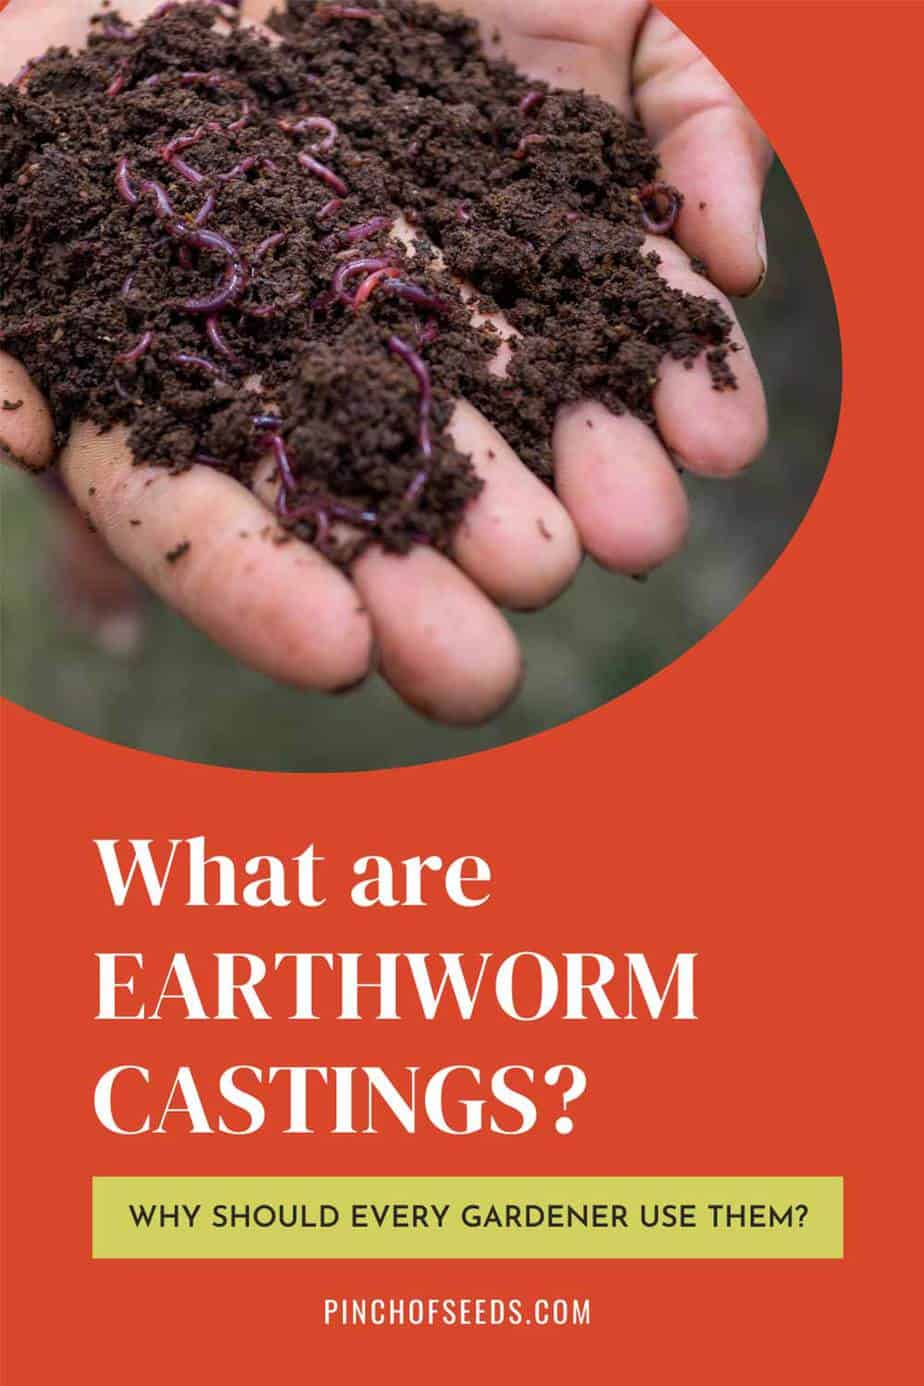 download worm castings near me